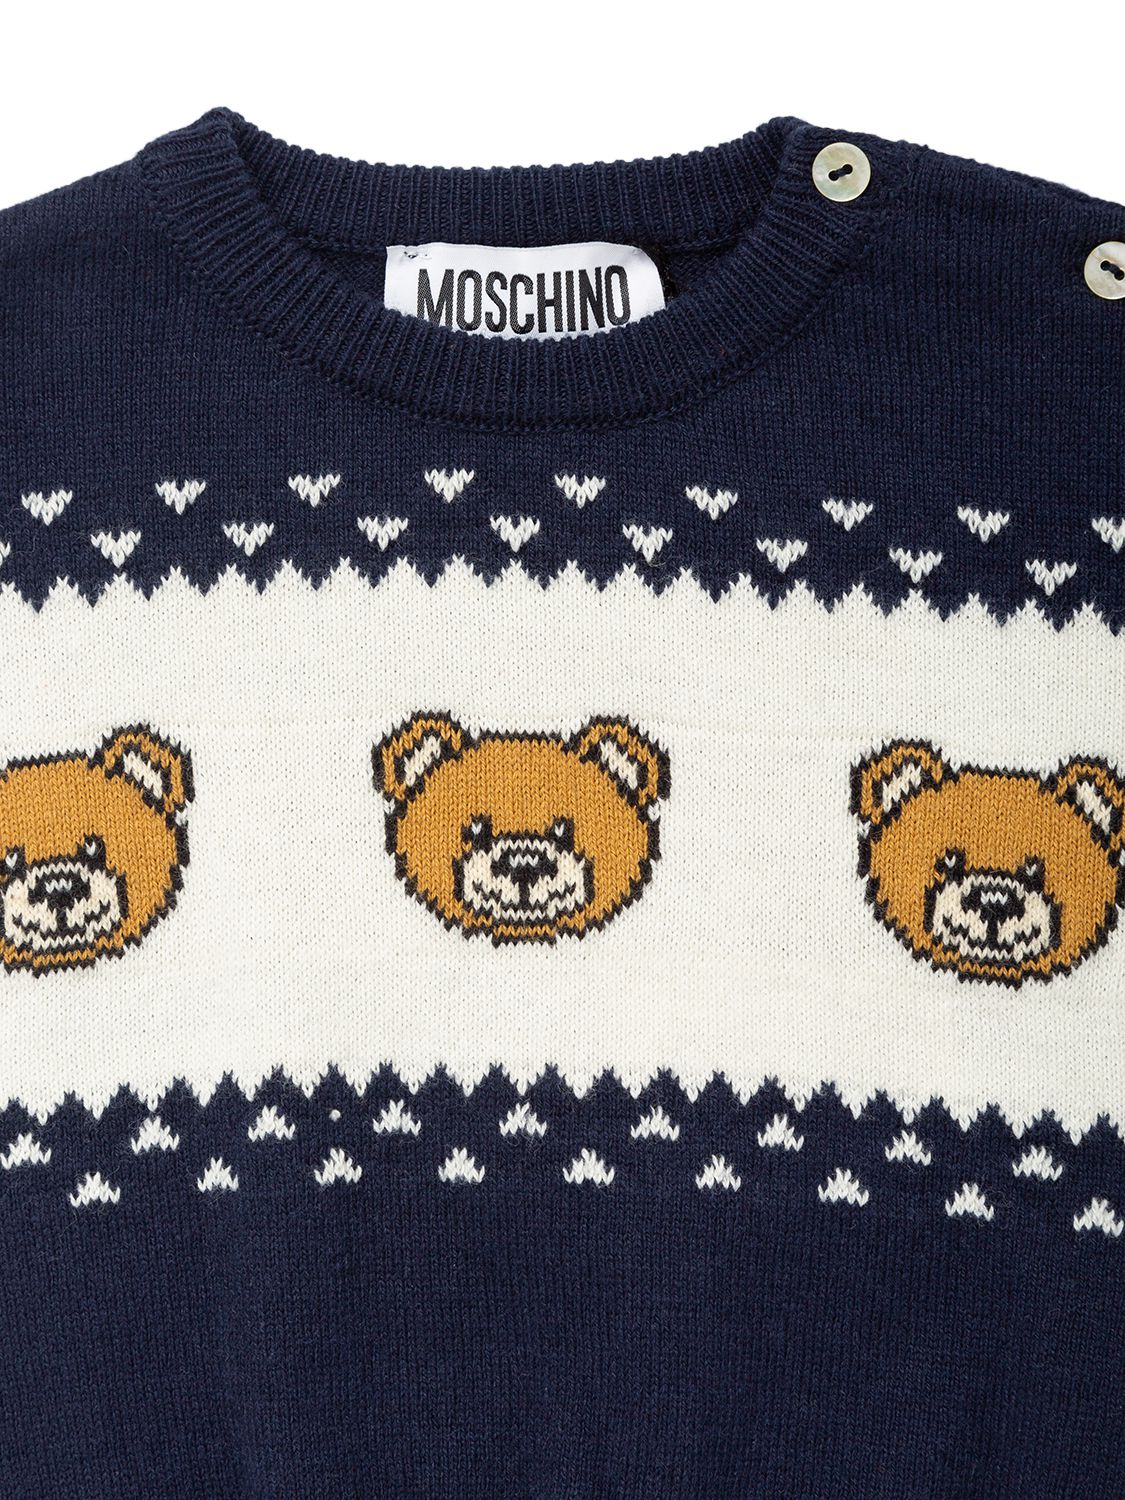 Shop Moschino Wool & Cotton Jacquard Knit Sweater In Navy